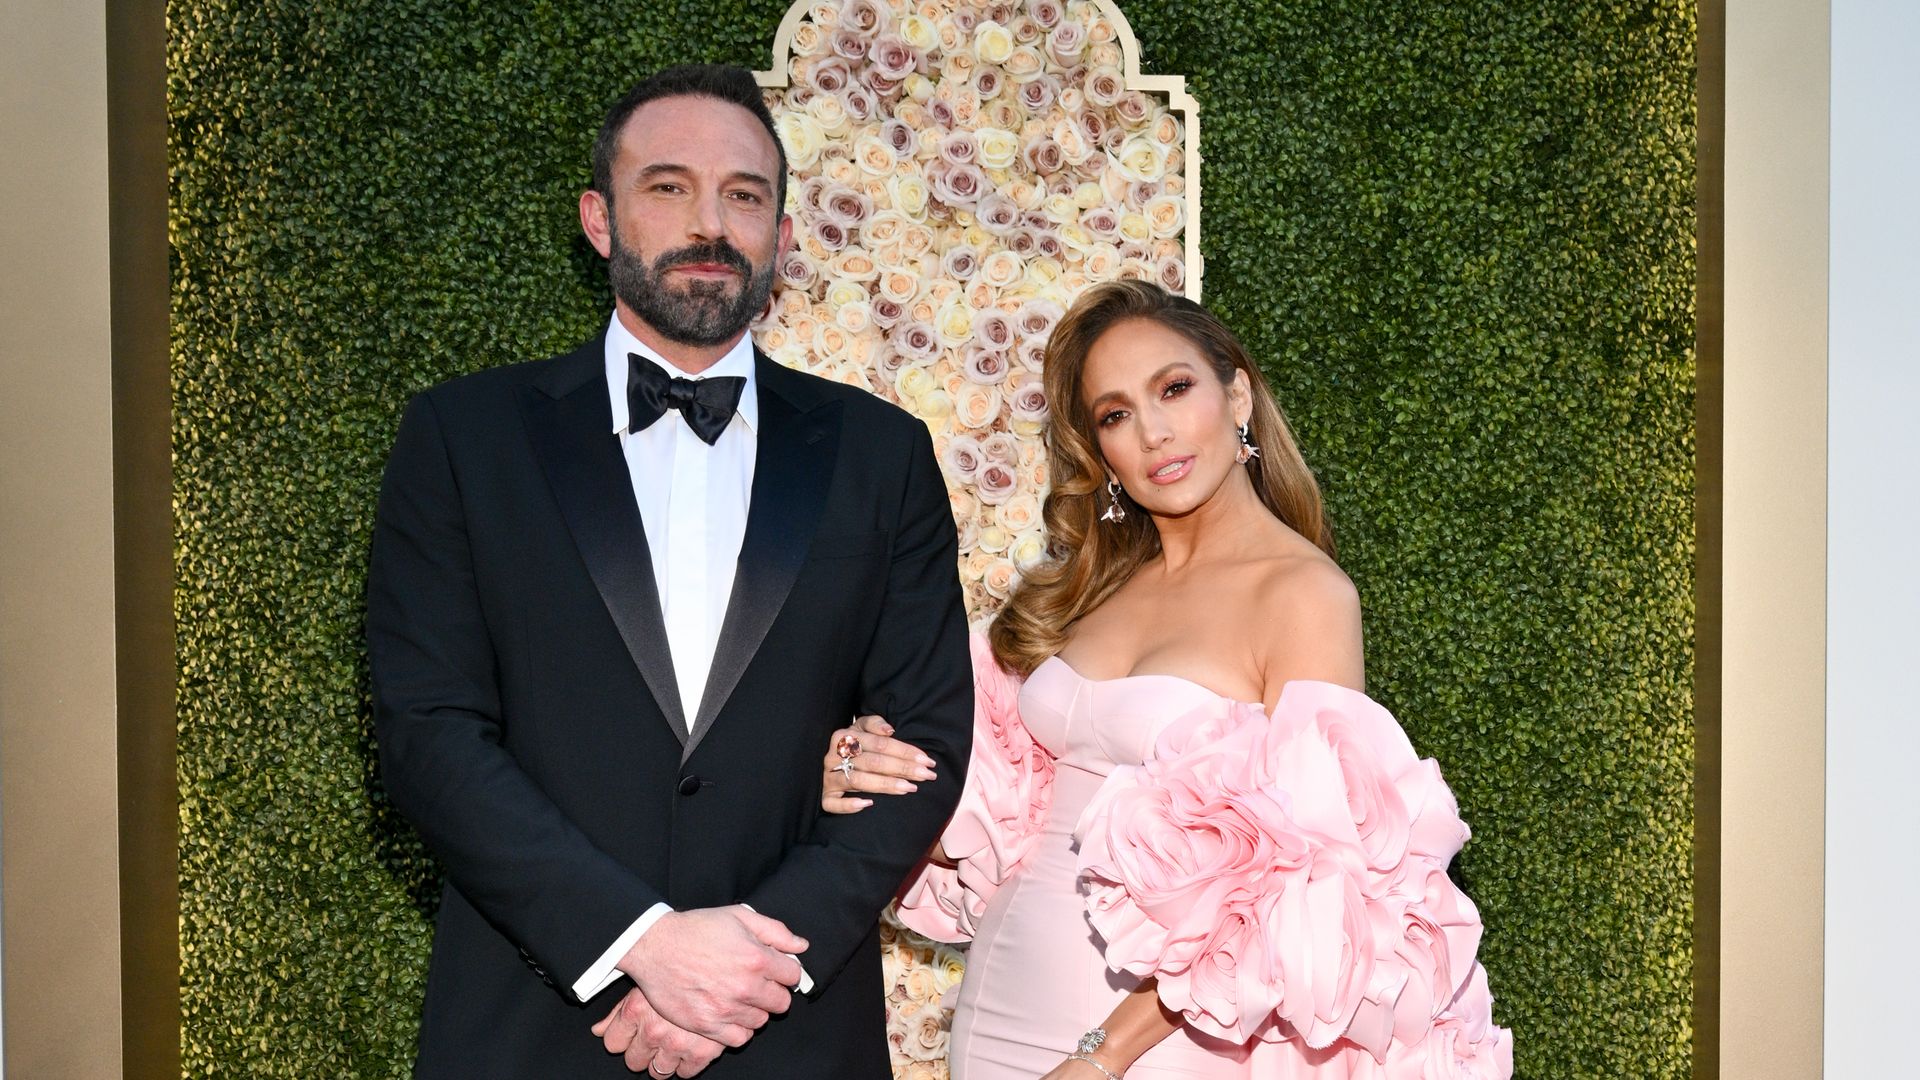 Ben Affleck and Jennifer Lopez's Beverly Hills mansion is officially on the market